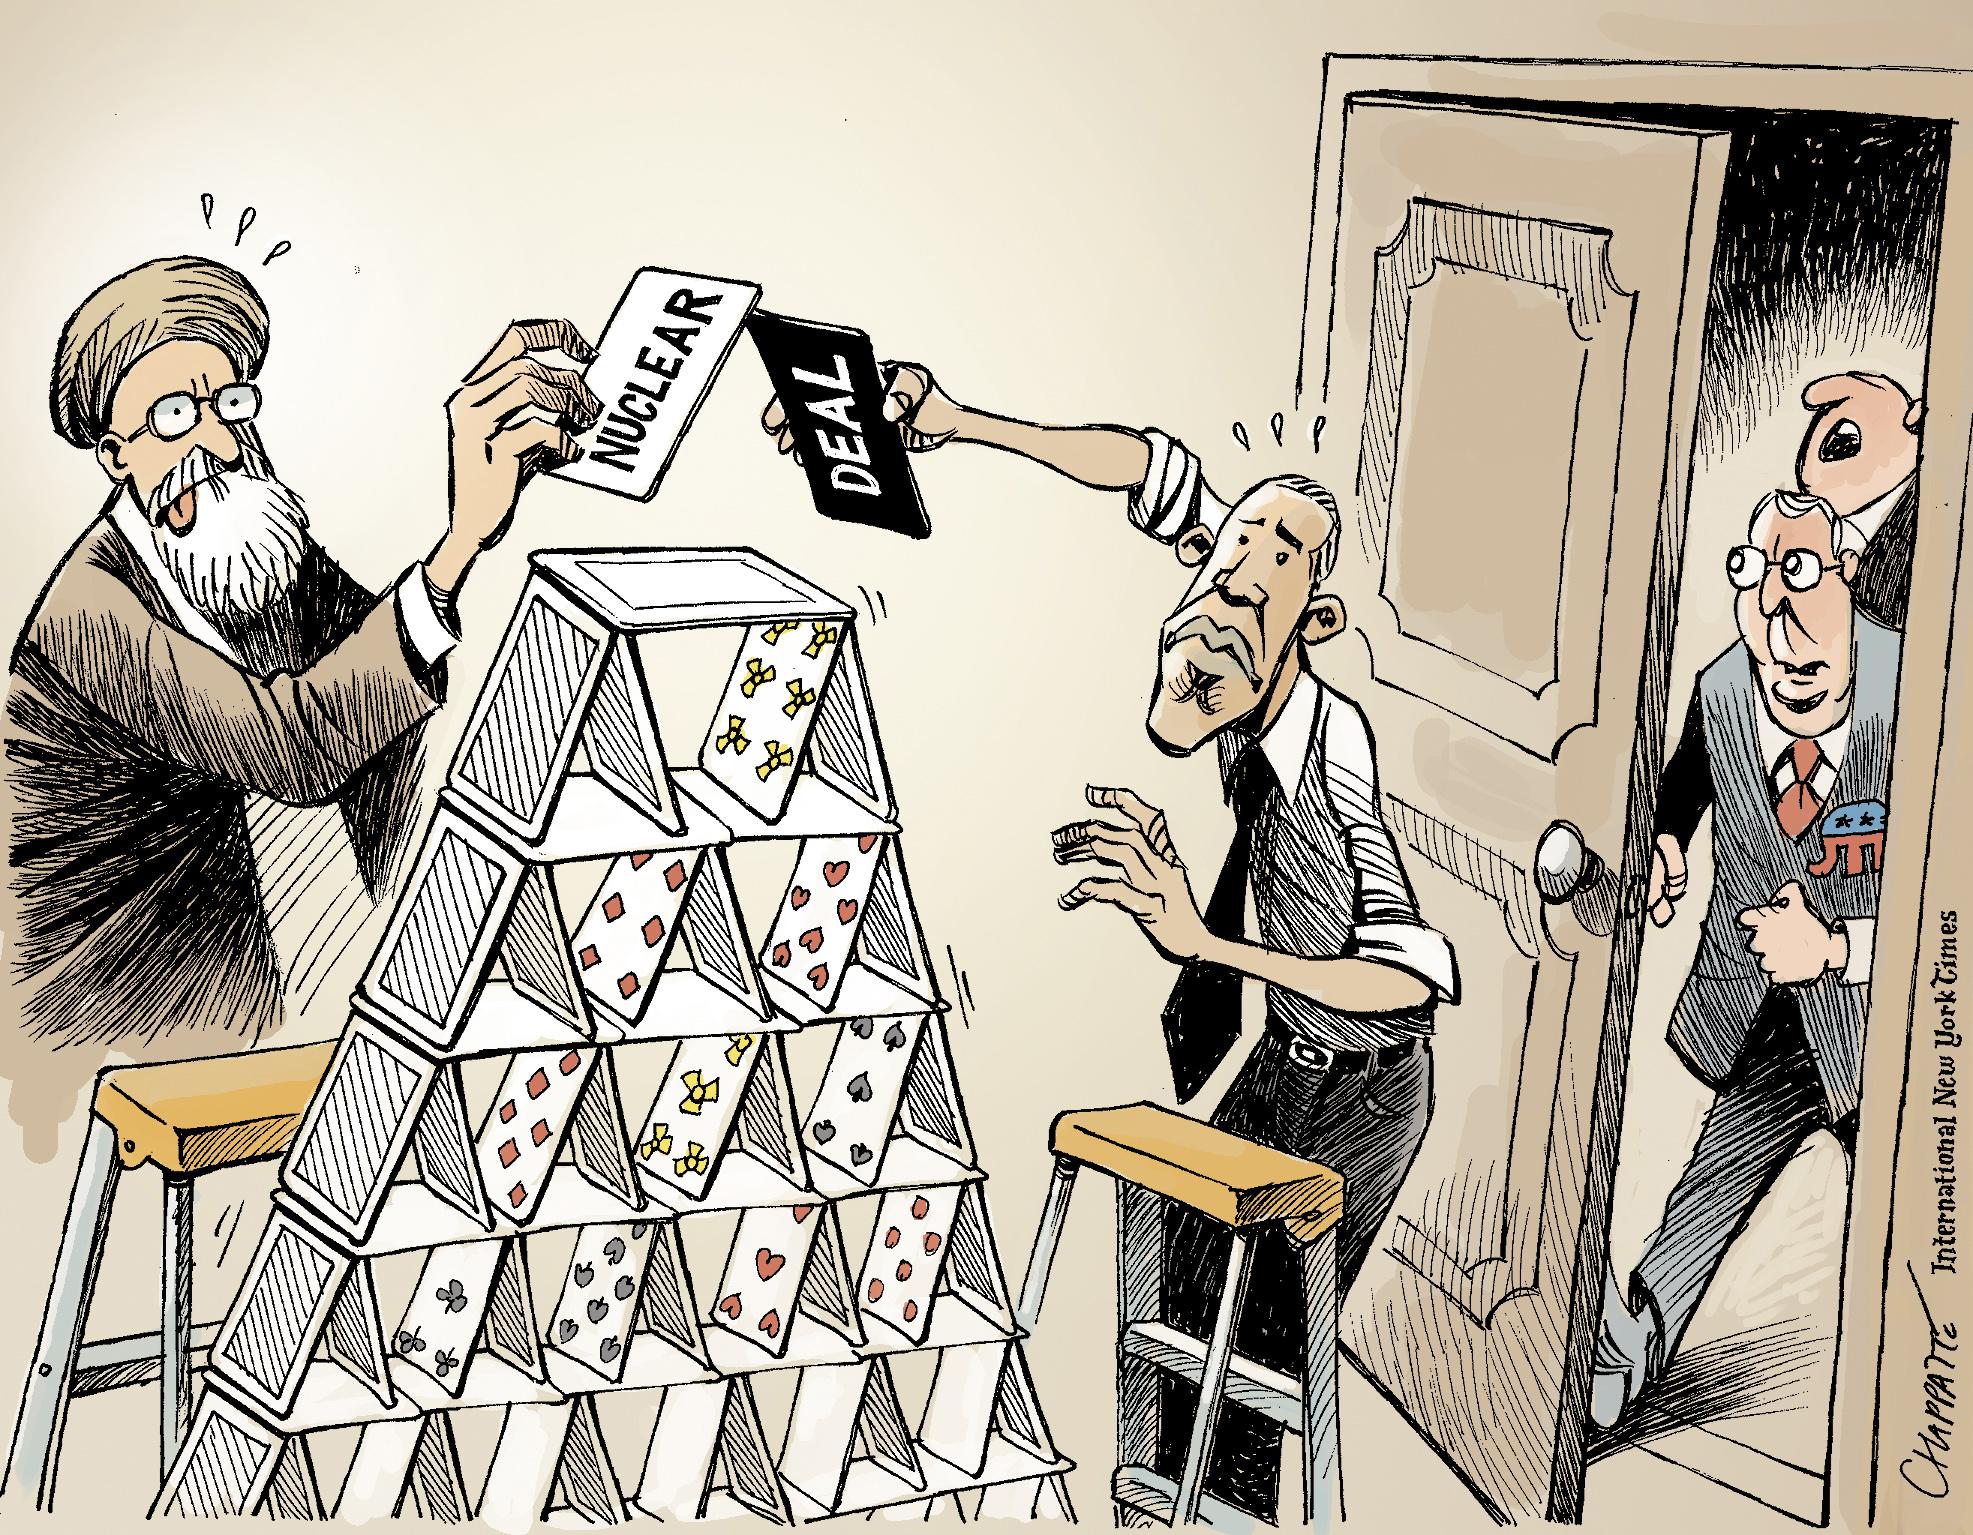 Tipping point in Iran nuclear talks